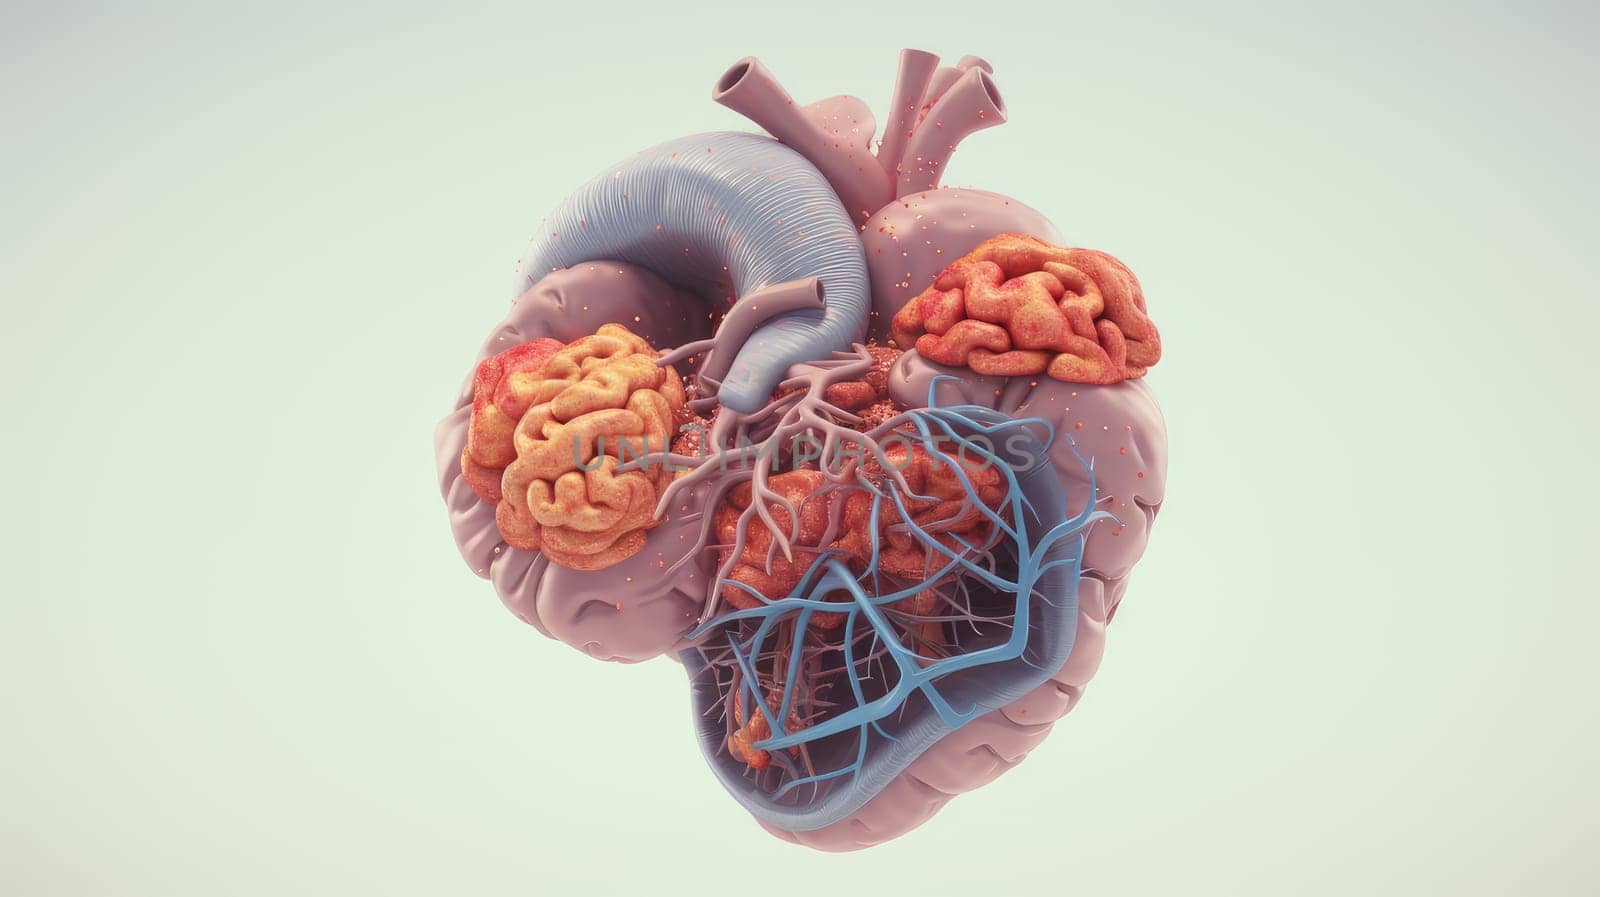 Anatomical model of the human body and organs. Part of a human body model with organ system. 3D modeling in the field of internal organ transplantation. Technologies in medicine and scientific research of the body, the study of human internal organs